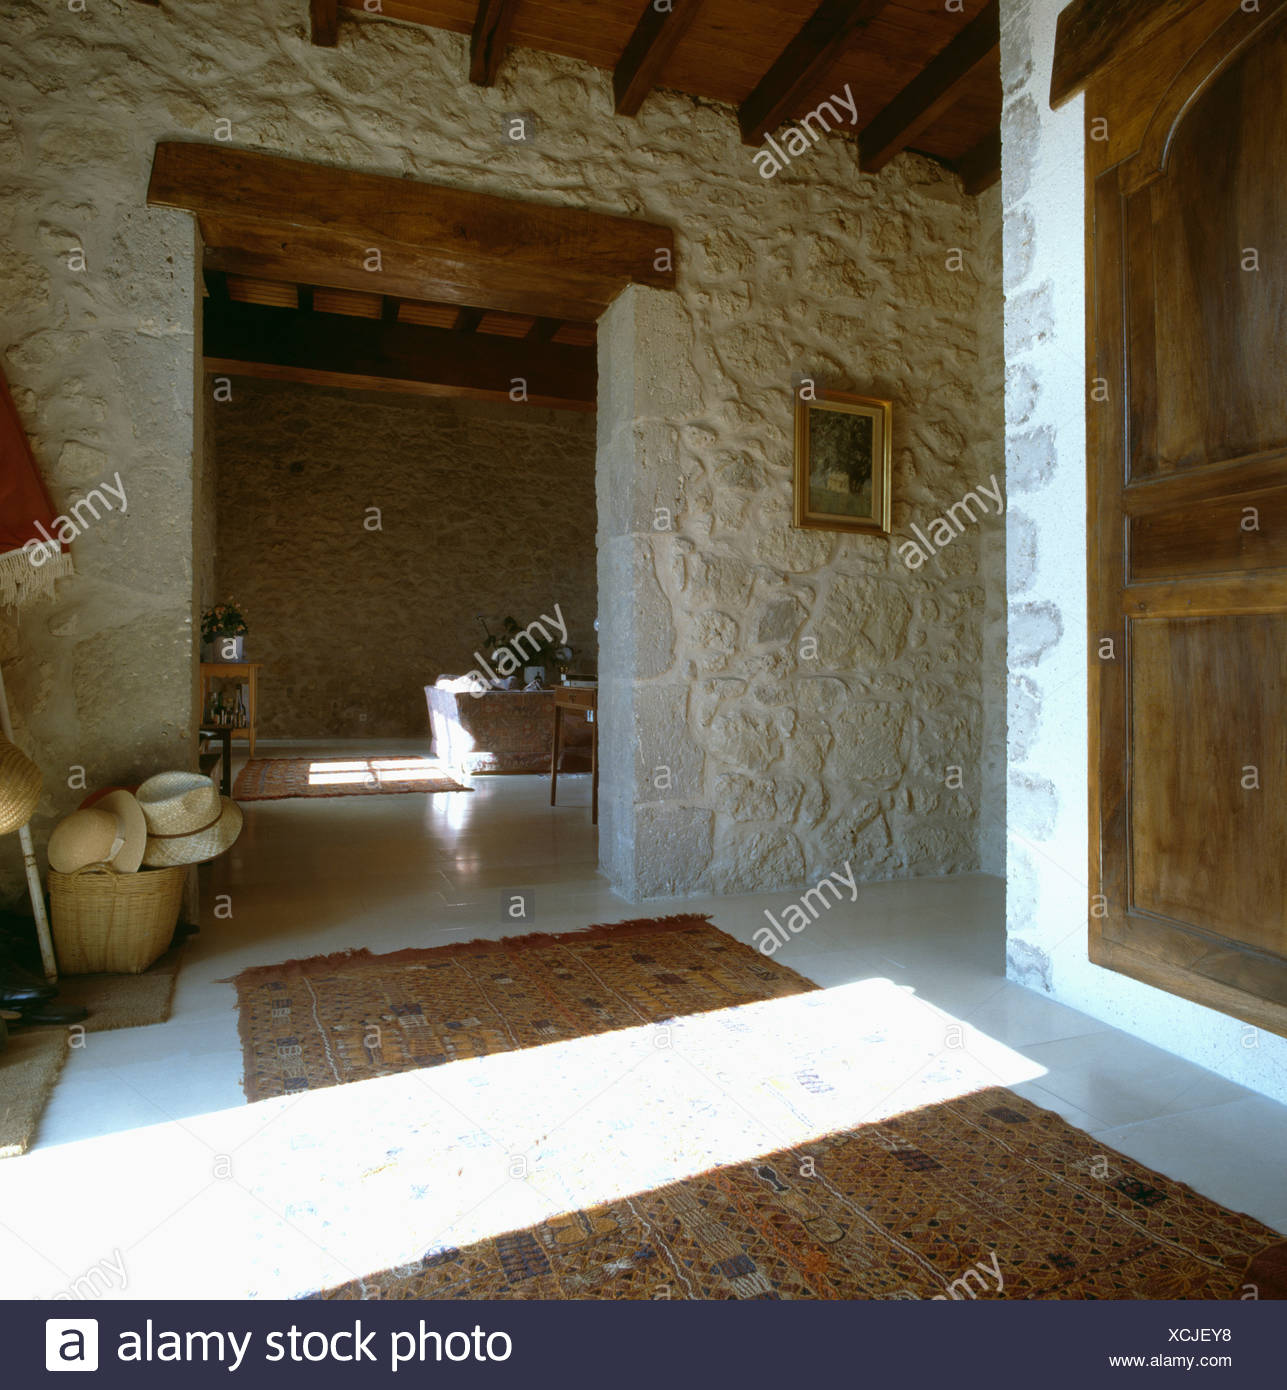 Stone Walls And Shaft Of Sunlight On Floor Of Rustic French